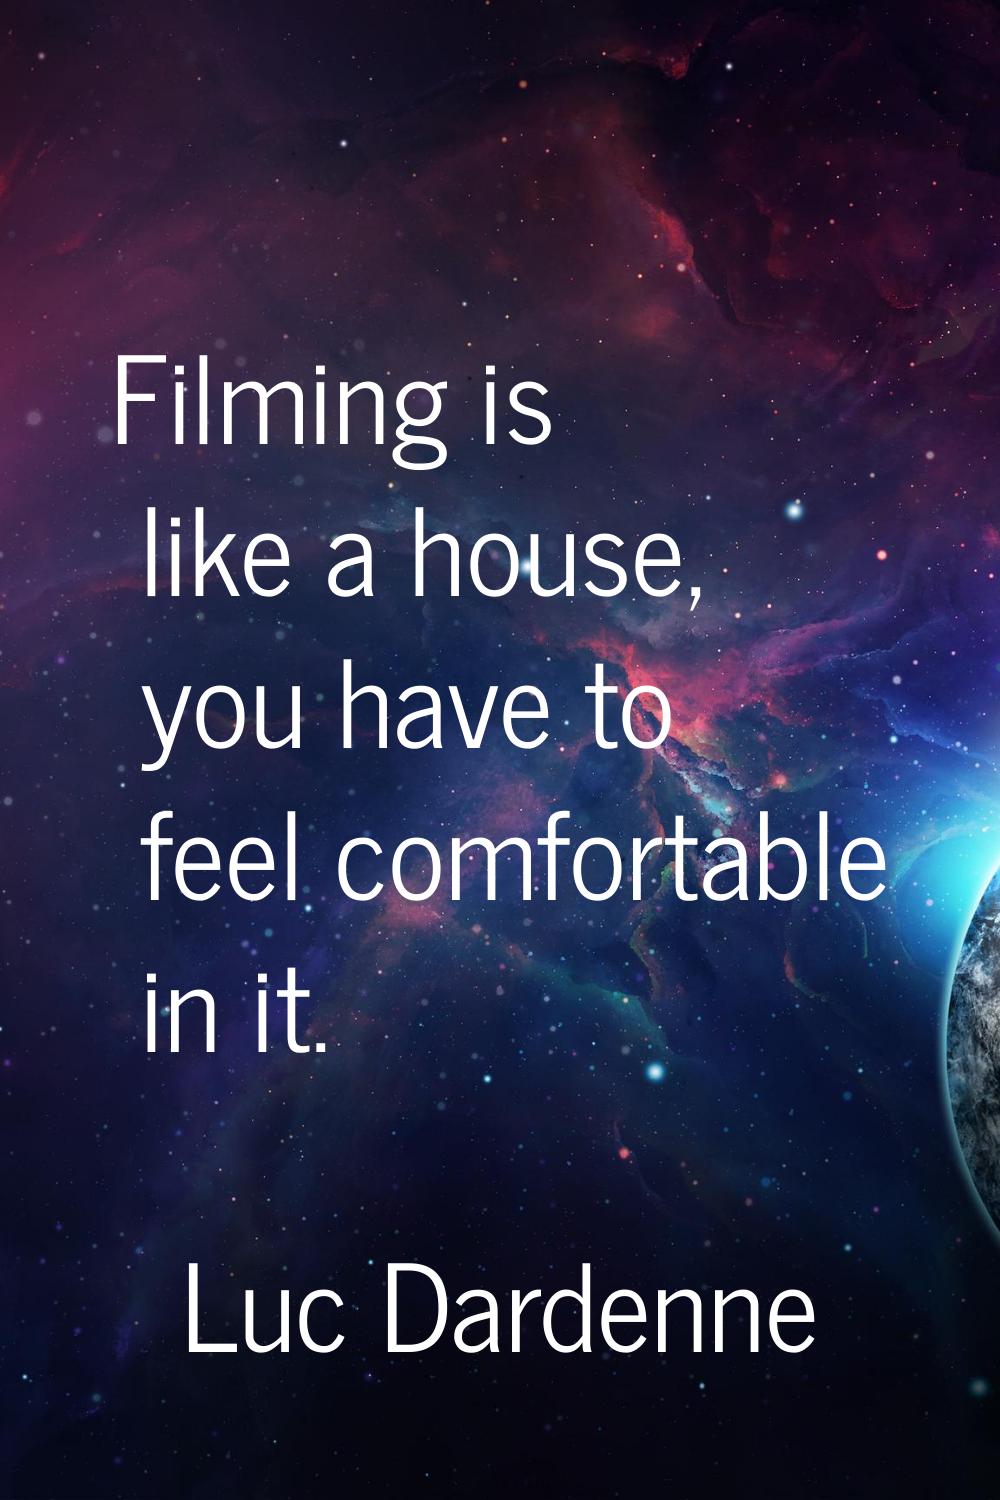 Filming is like a house, you have to feel comfortable in it.